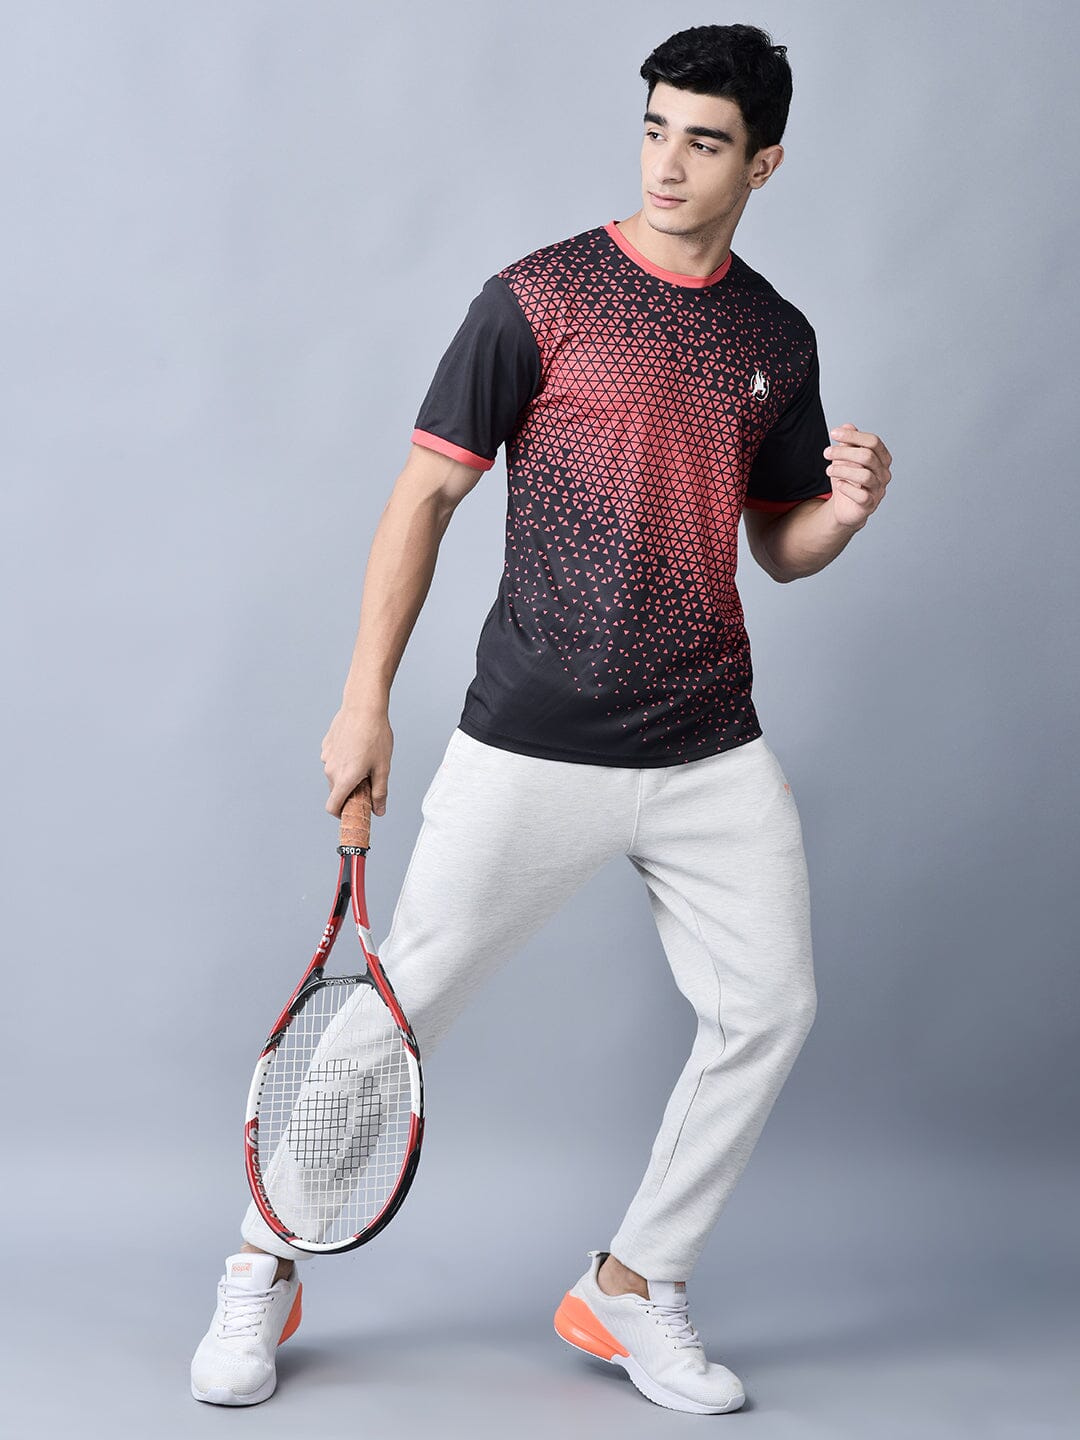 Ready-to-Play Jersey Black/Red - trenz